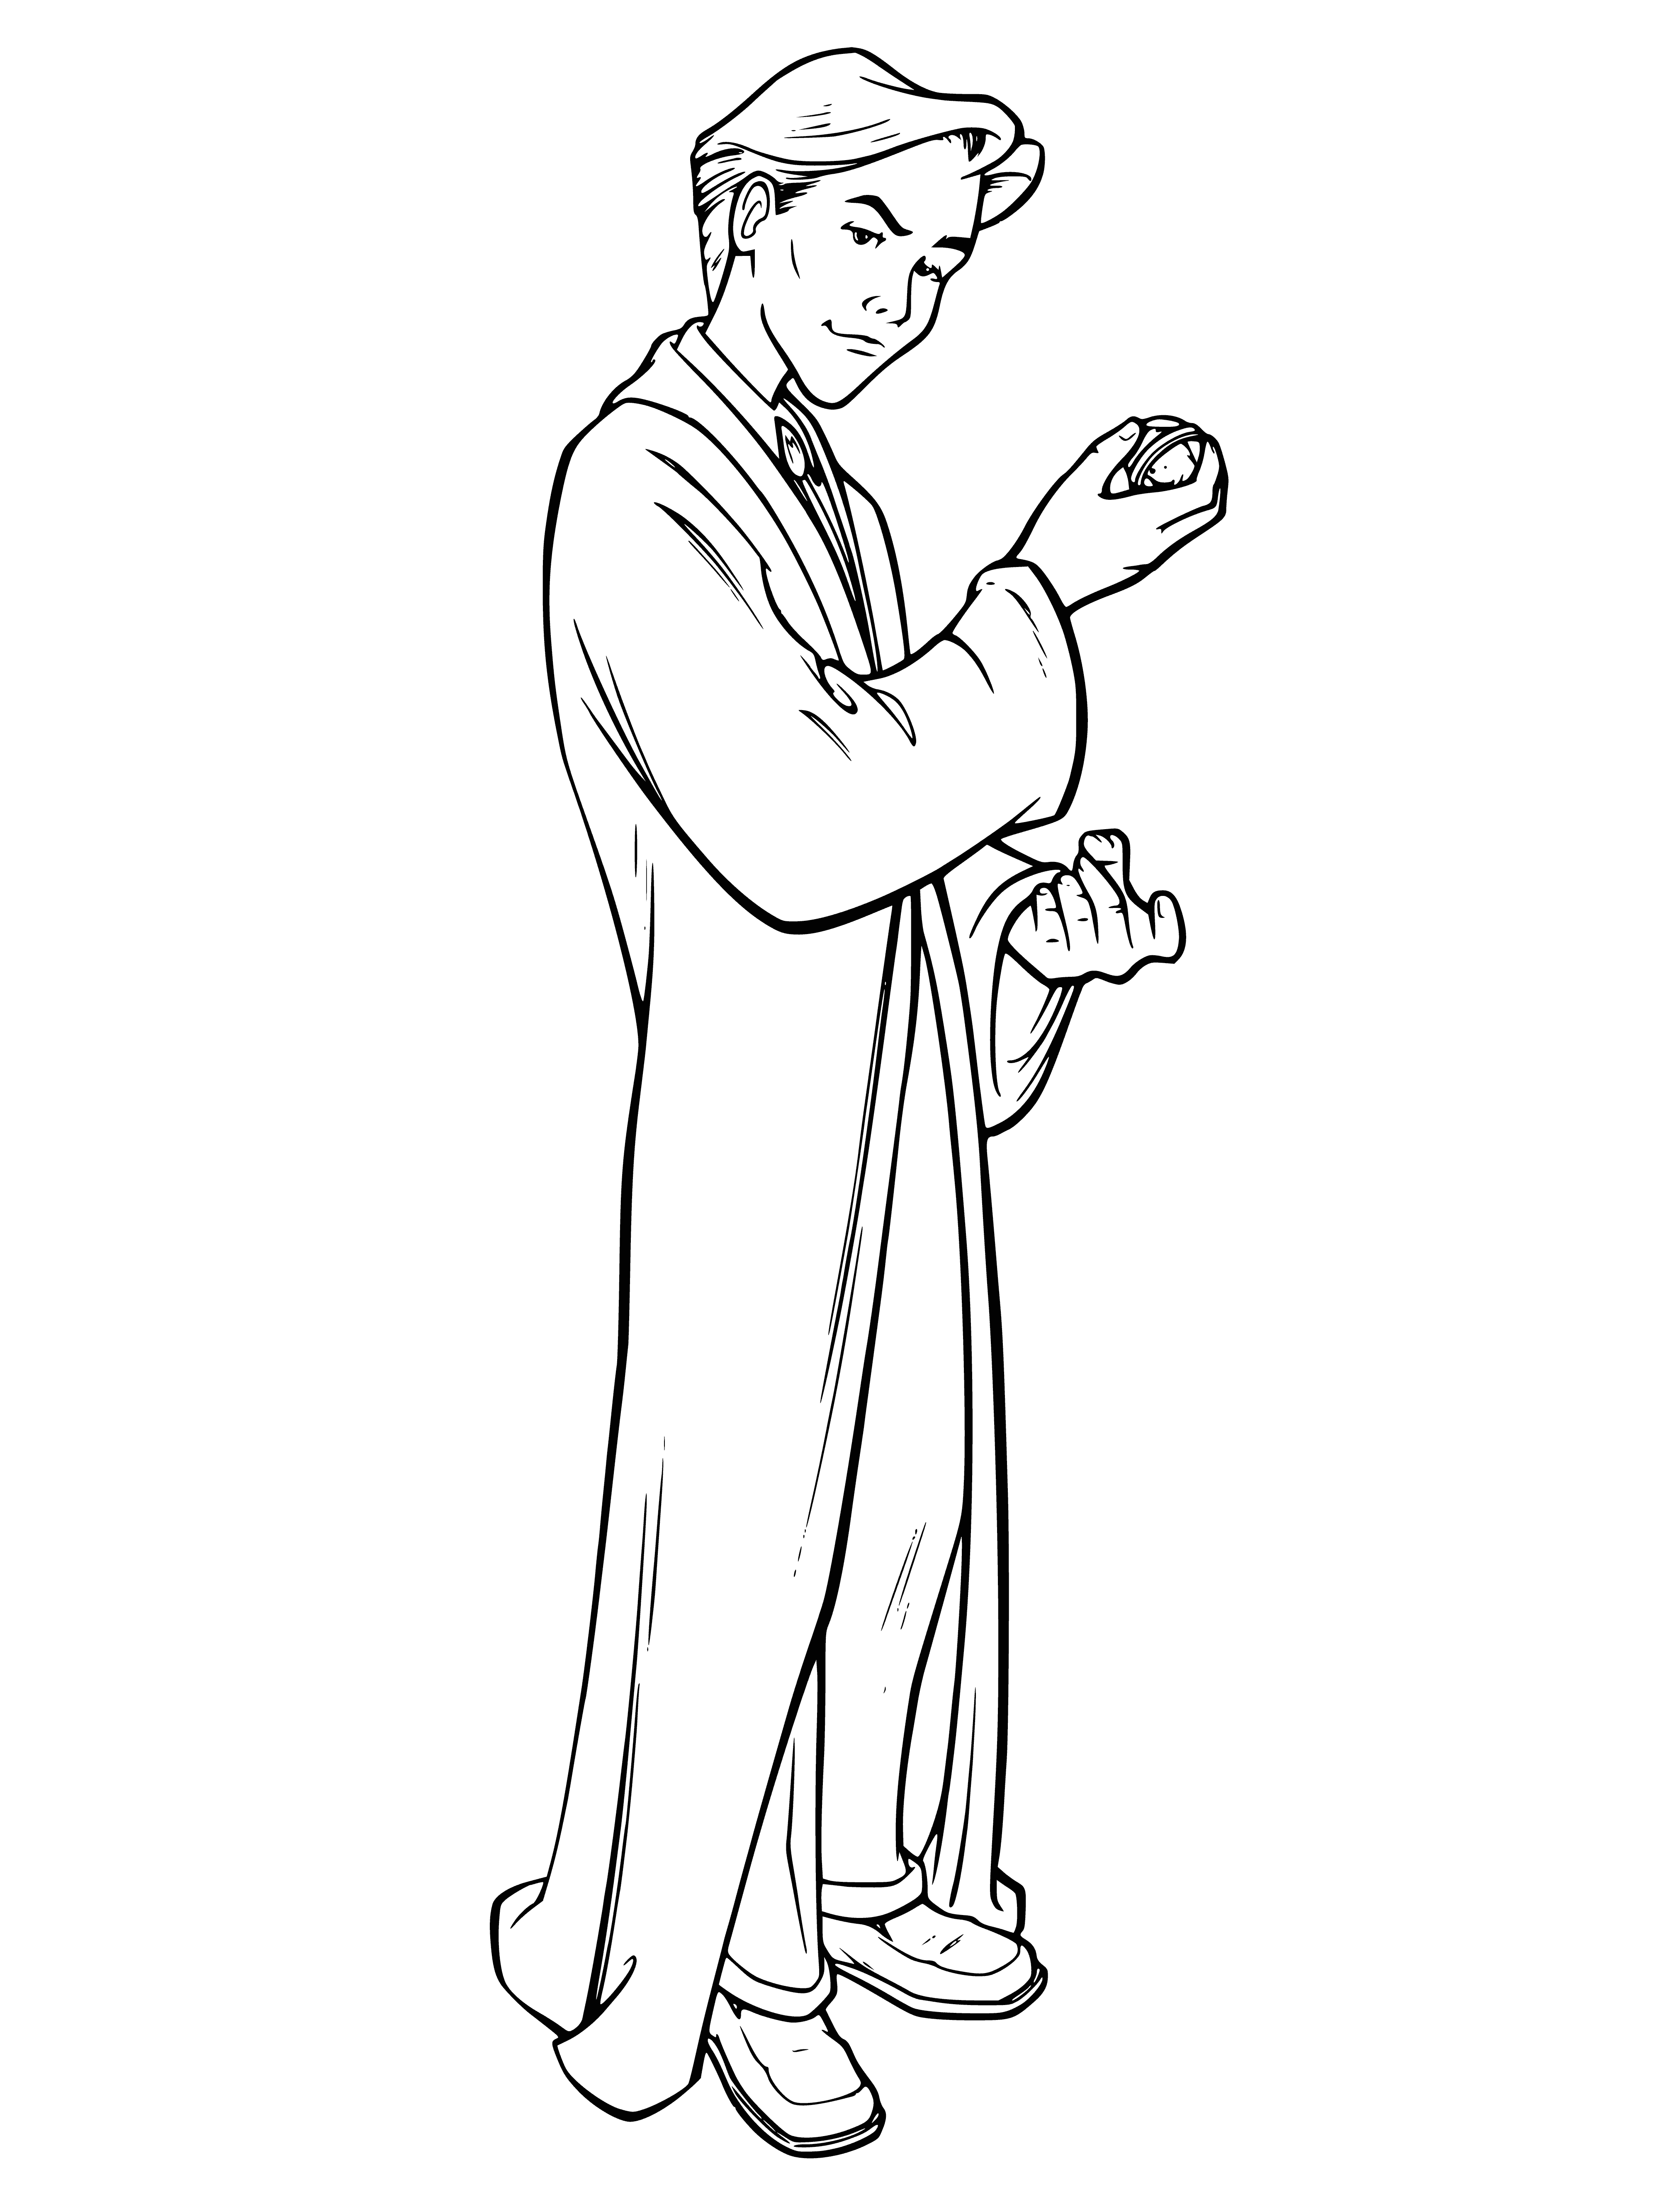 coloring page: Draco Malfoy is a sneering blonde boy wielding a wand, ready for a fight.